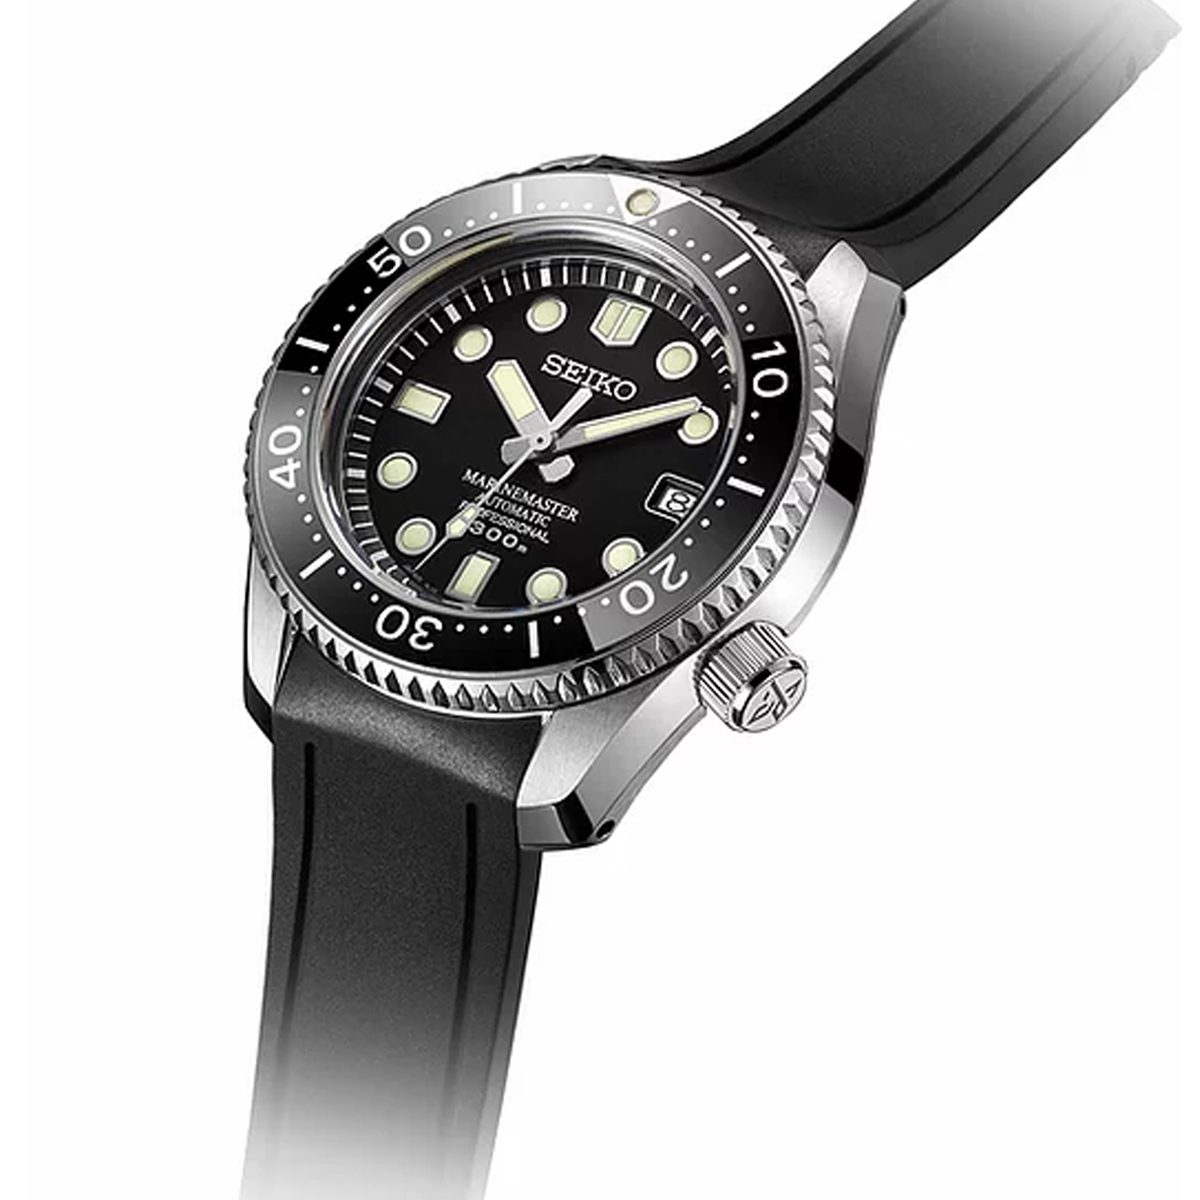 Crafter Blue - Fitted End Rubber Strap for Seiko Marine Master